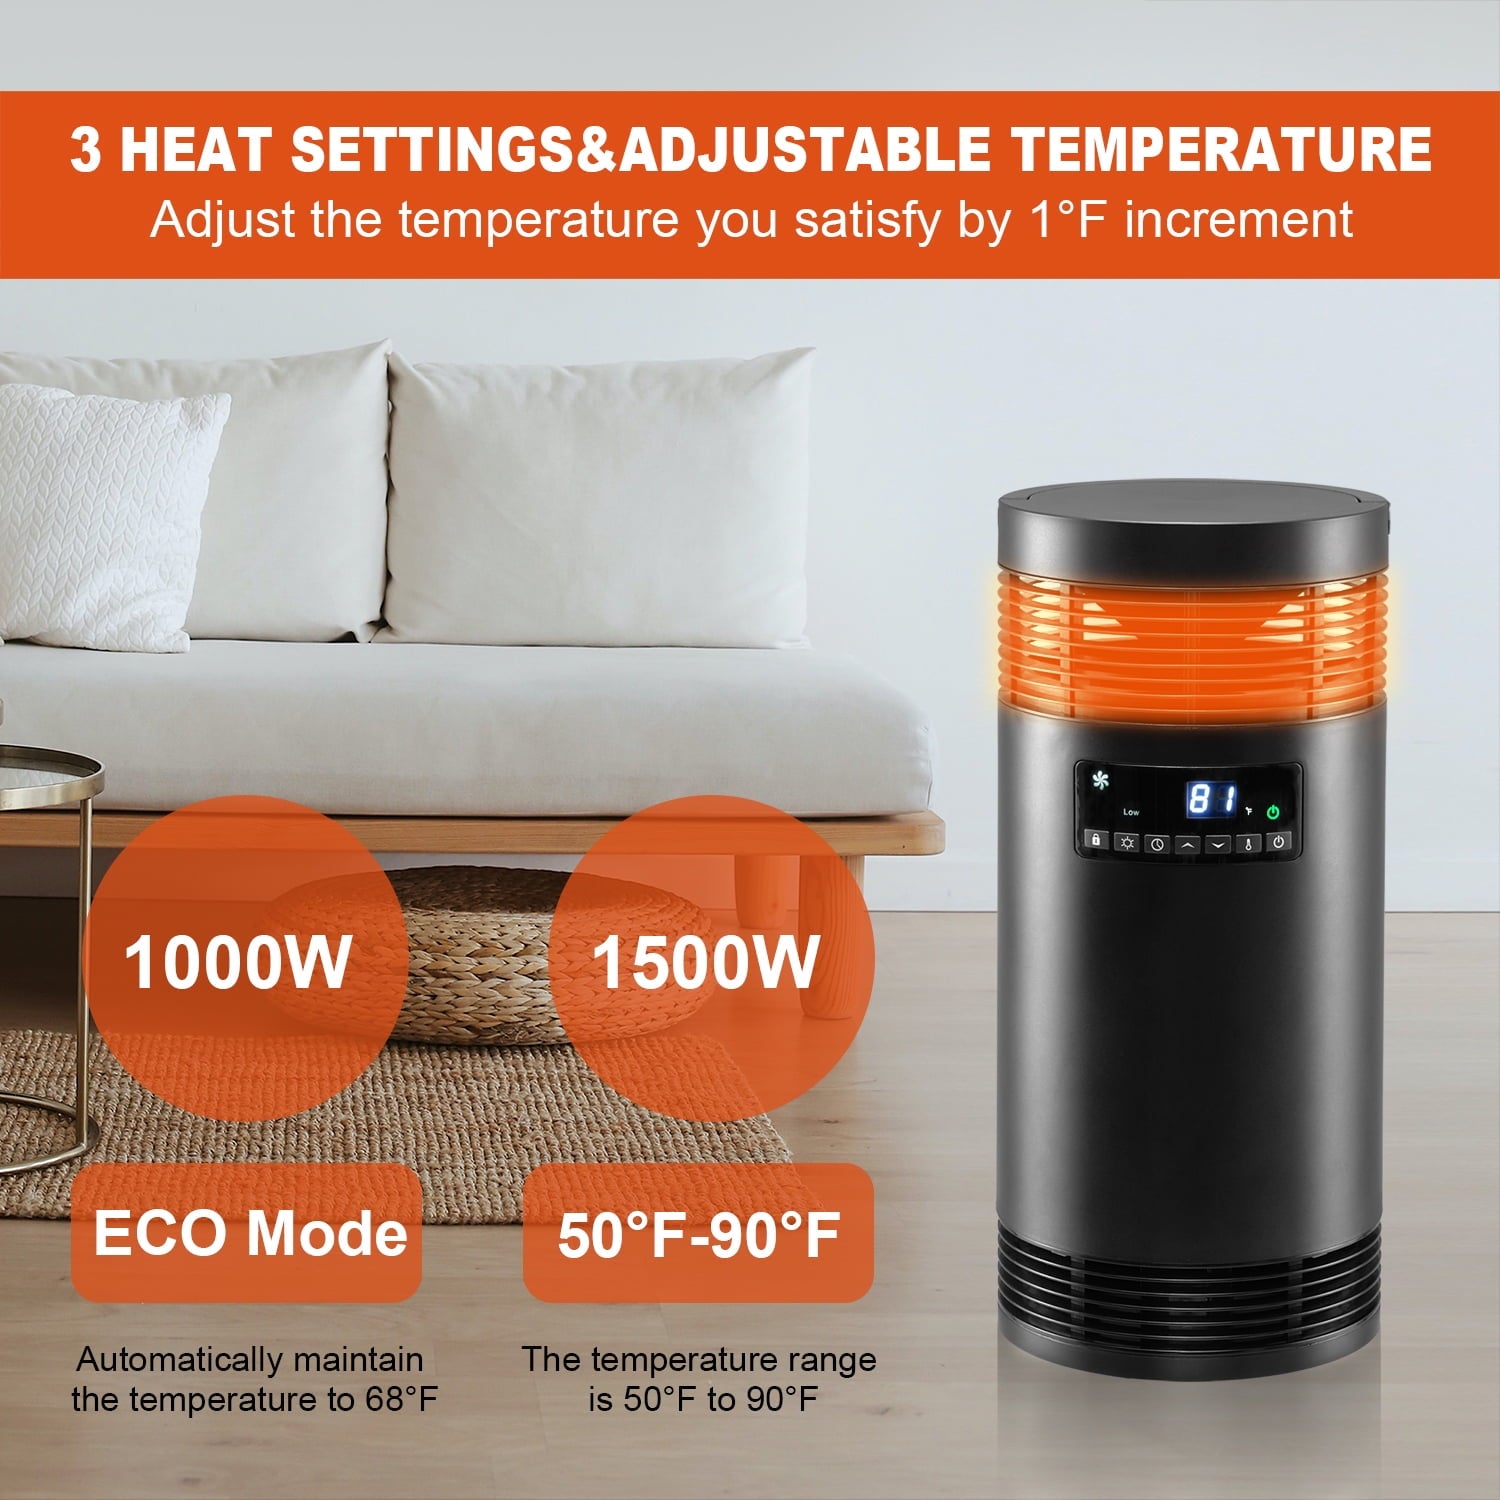 Wewarm 360 Digital Surround Space Heater, 1500W Ceramic Electric Heater with Thermostat